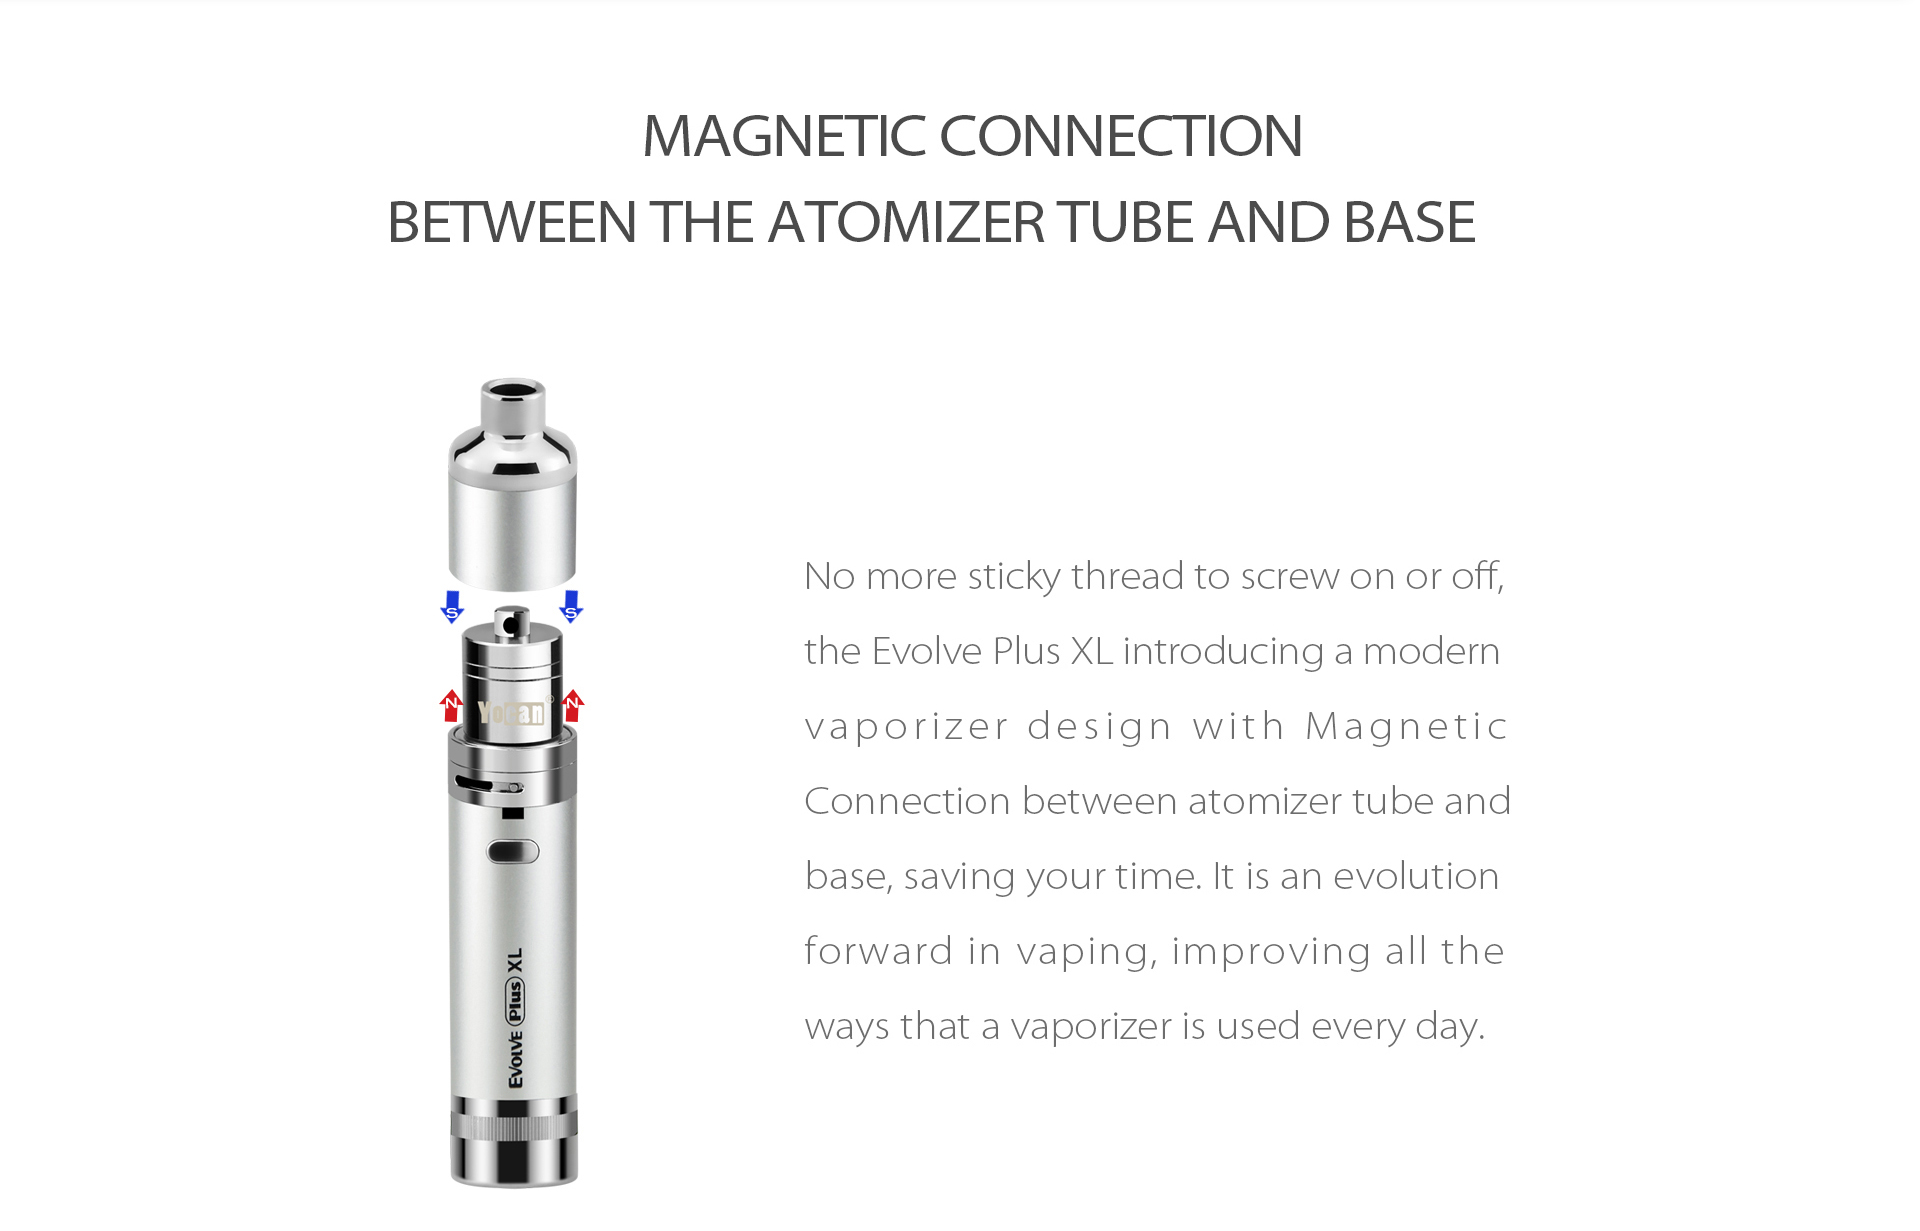 Yocan Evolve Plus XL Vaporizer 2020 version features magnetic connection between the atomizer tube and base.